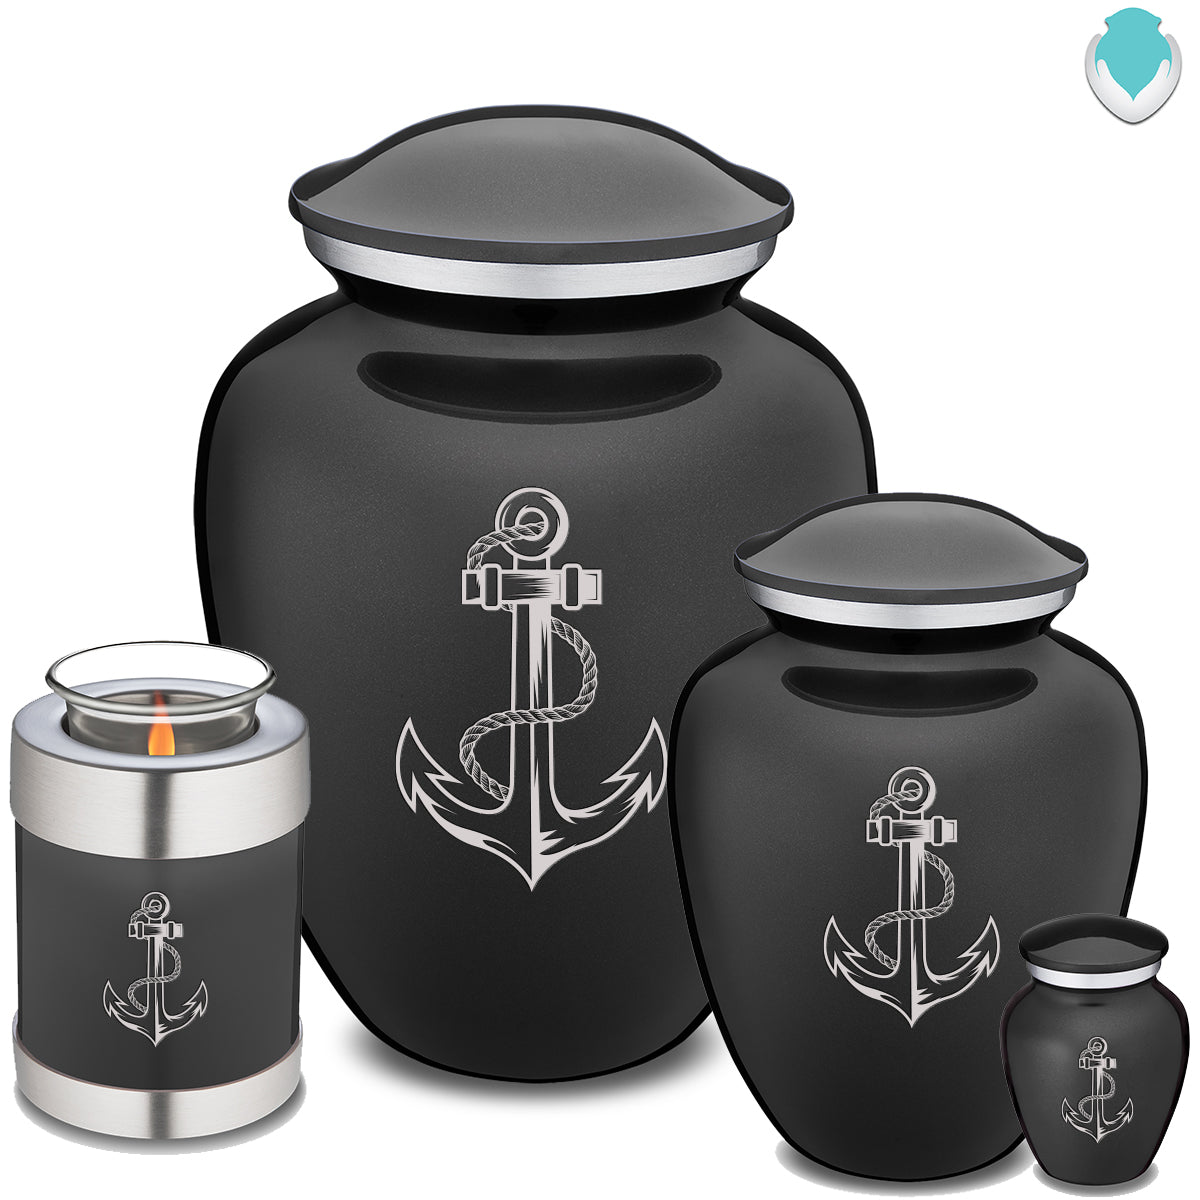 Adult Embrace Charcoal Anchor Cremation Urn